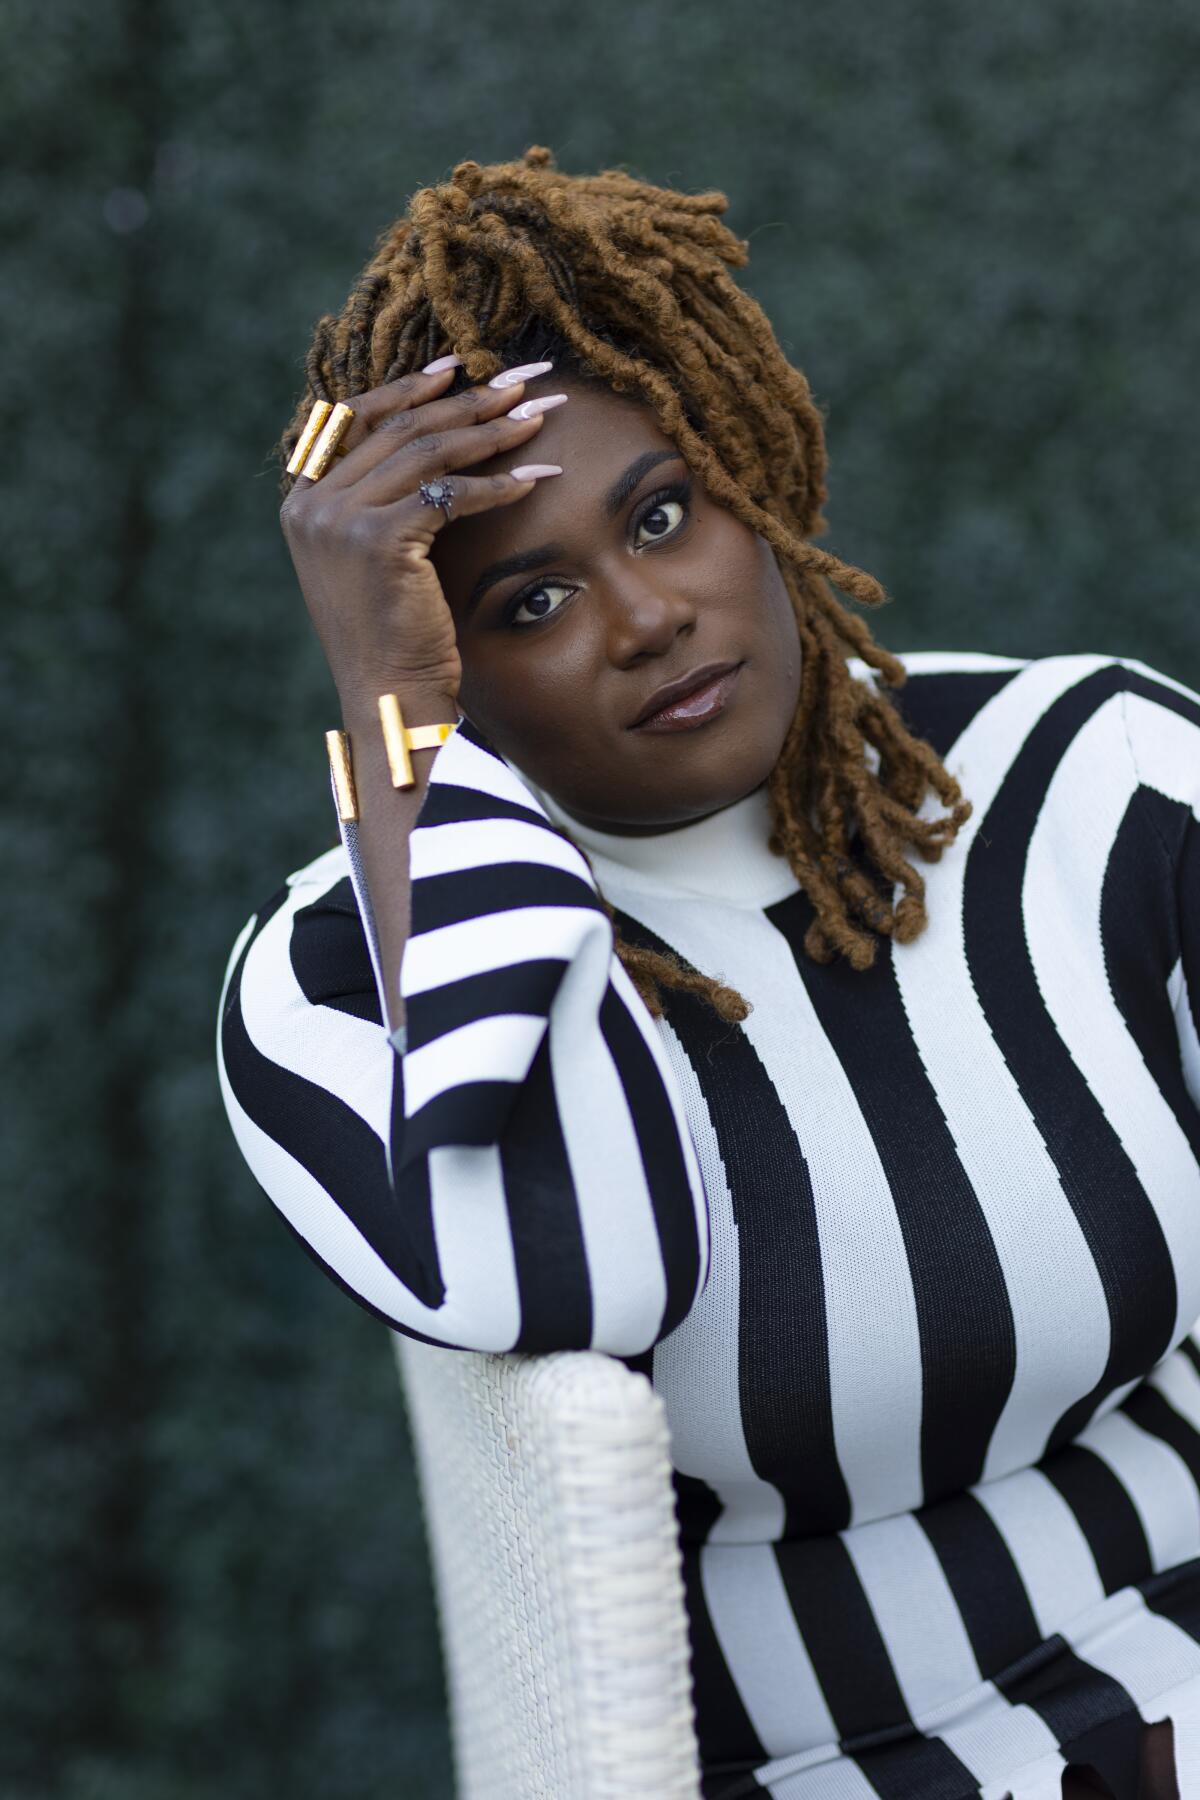 Danielle Brooks wears a black-and-white striped outfit as she sits sideways on a chair for a portrait.